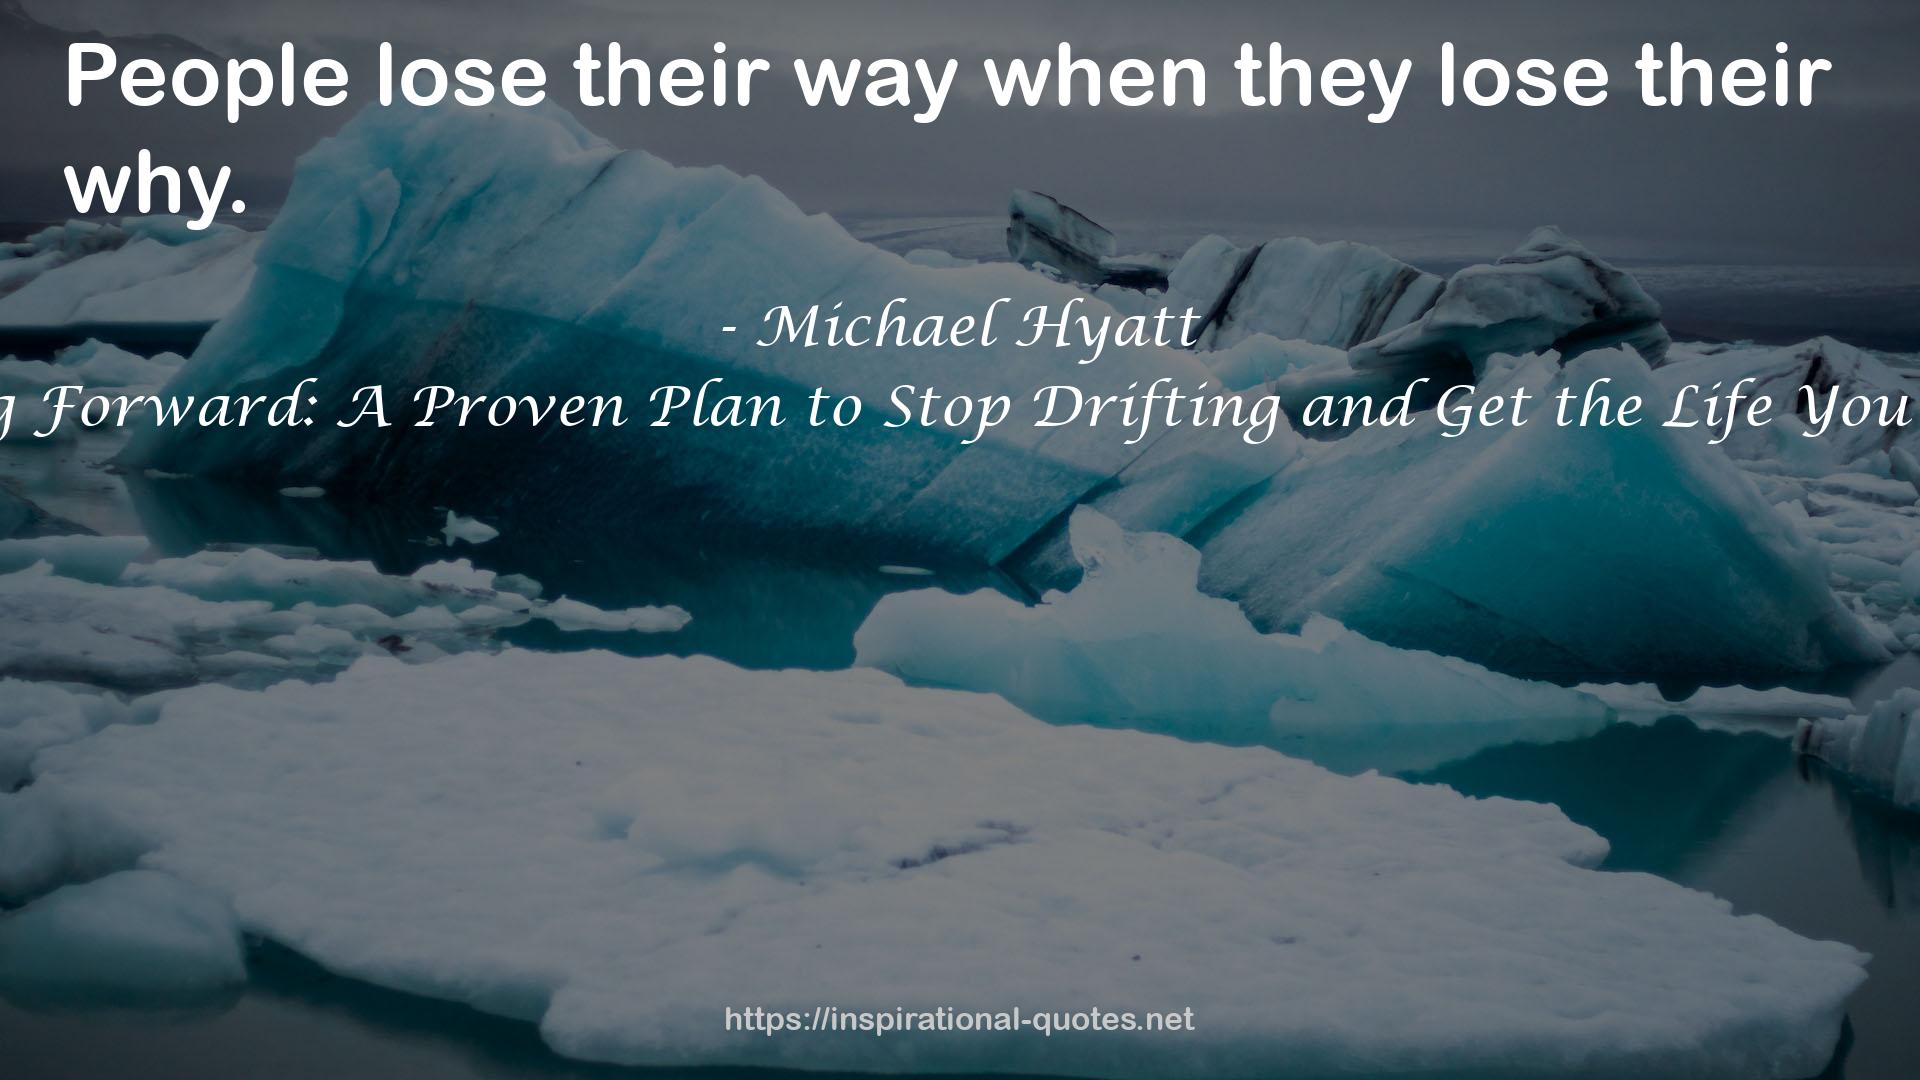 Living Forward: A Proven Plan to Stop Drifting and Get the Life You Want QUOTES